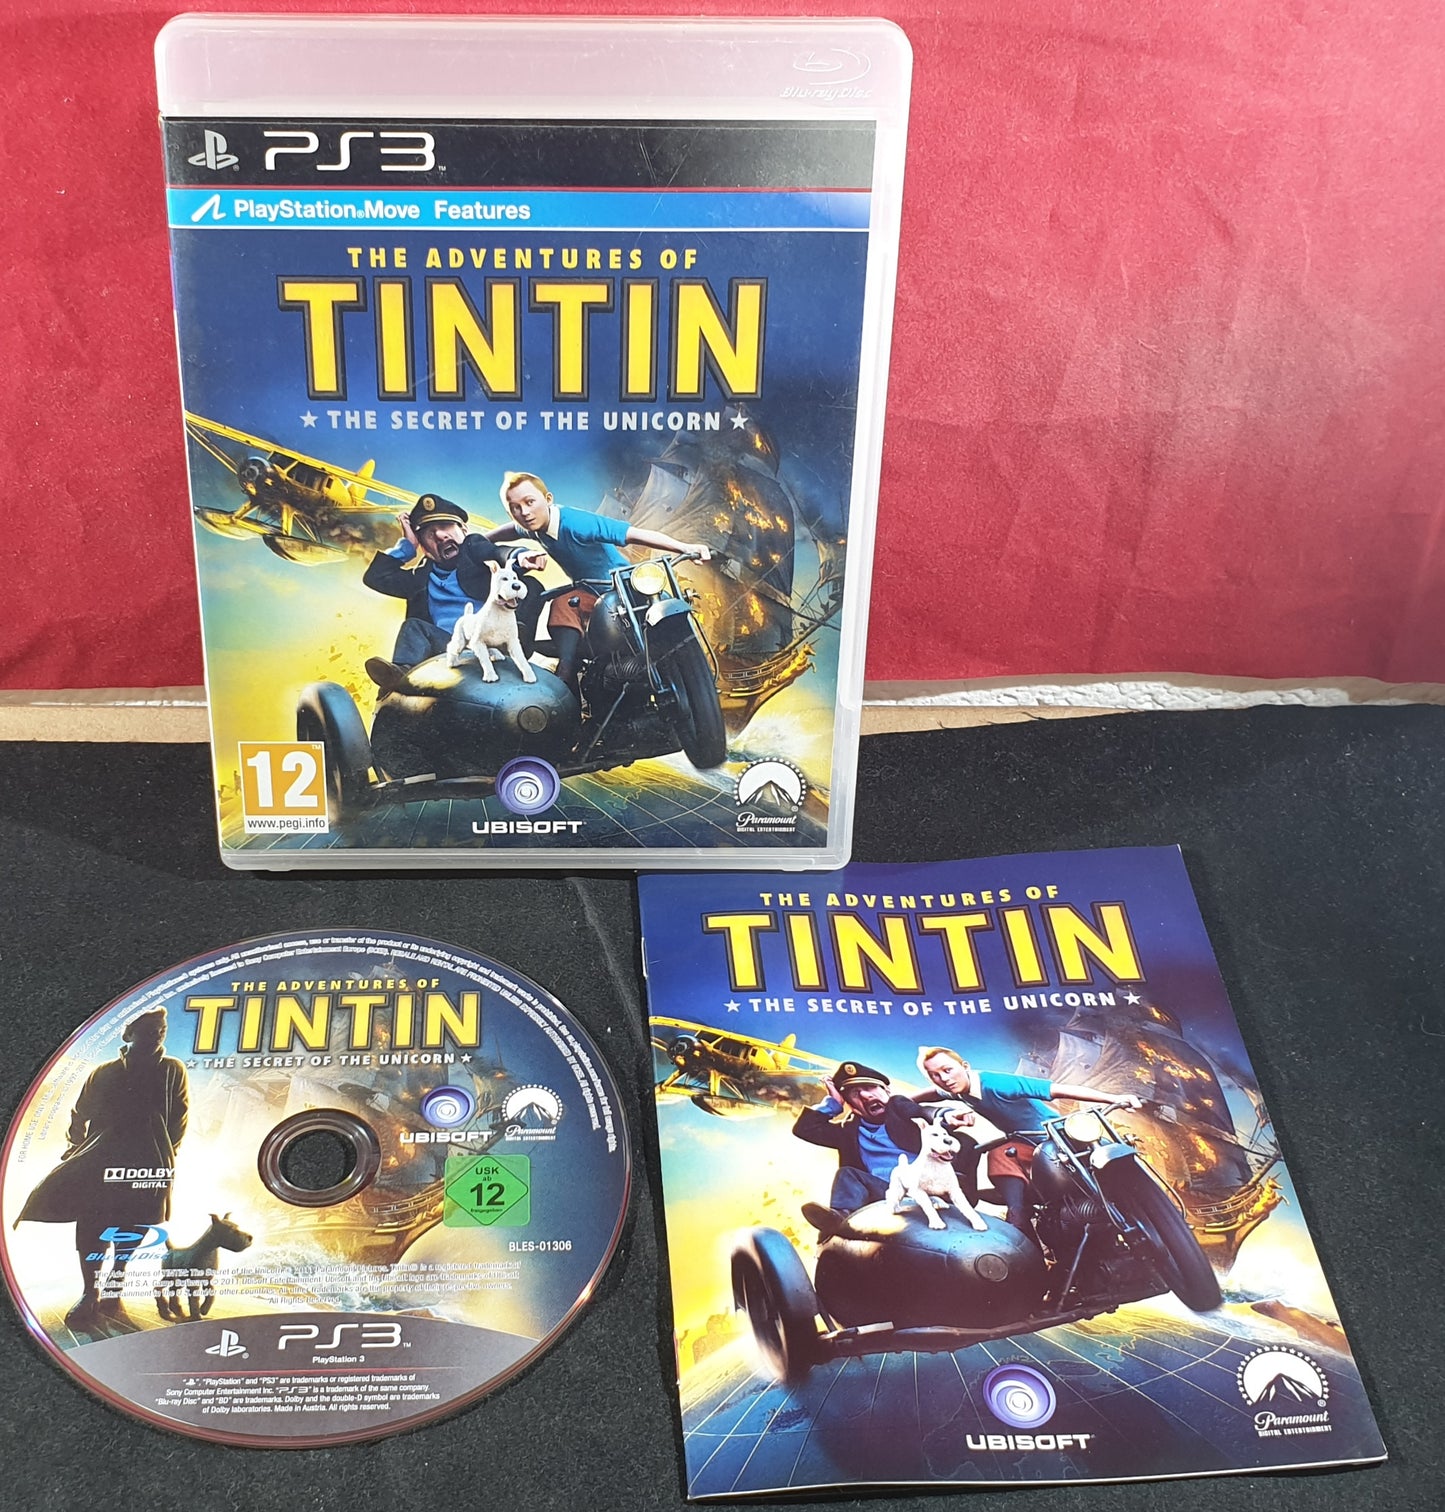 The Adventures of Tintin the Secret of the Unicorn Sony Playstation 3 (PS3) Game